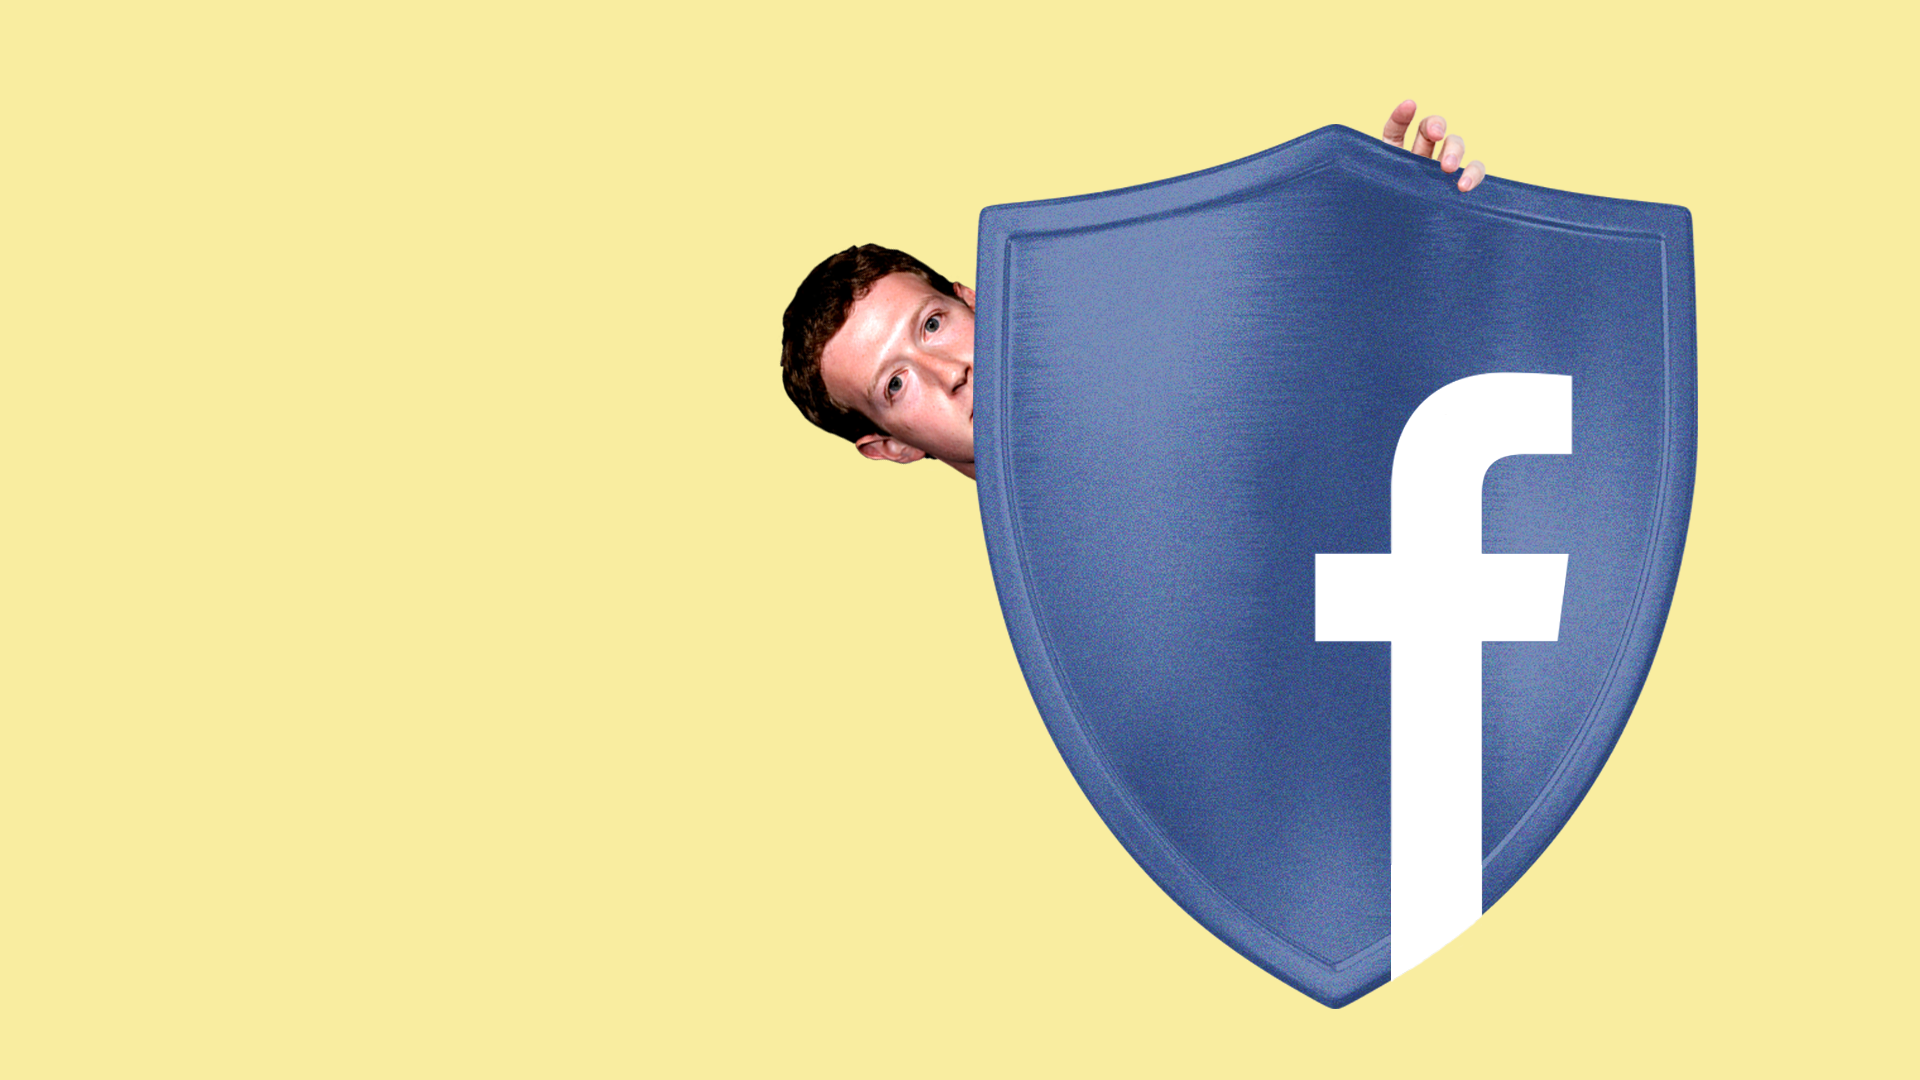 Illustration of Facebook CEO Mark Zuckerberg peeking out from behind a security shield